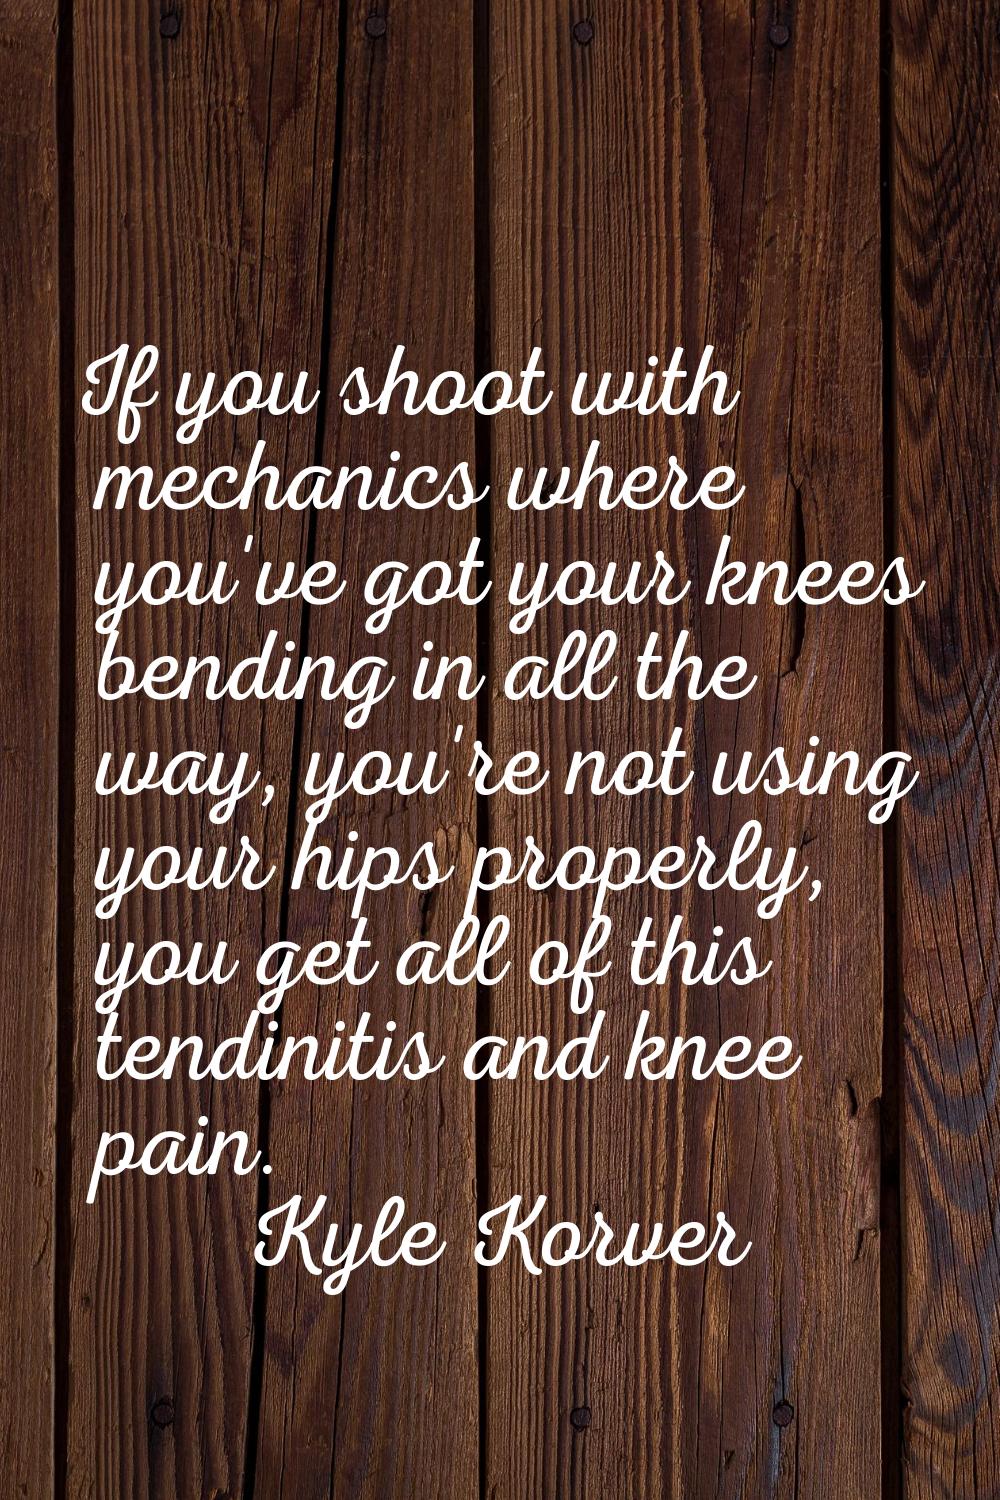 If you shoot with mechanics where you've got your knees bending in all the way, you're not using yo